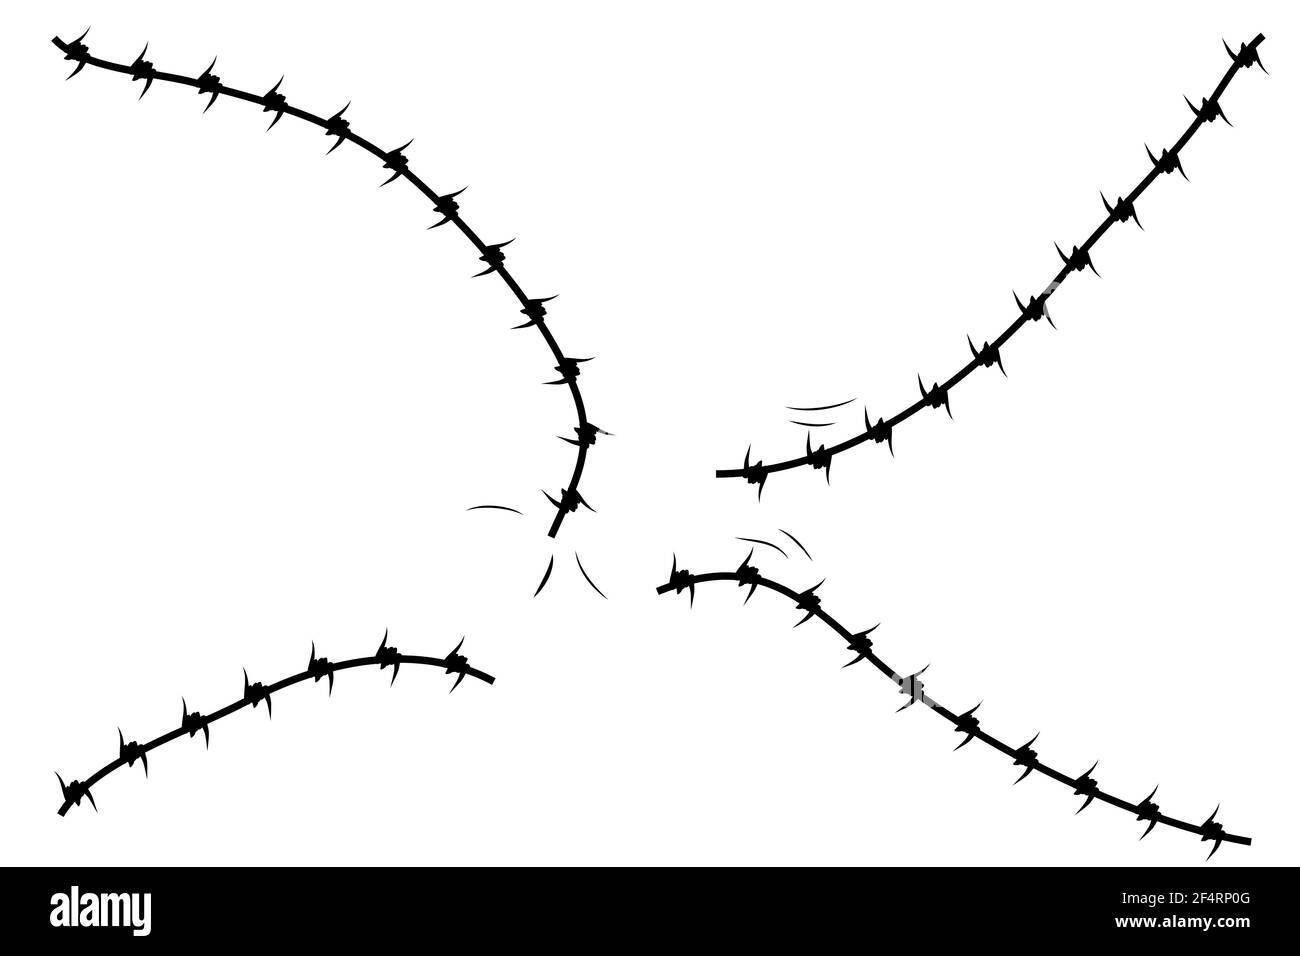 Vector Silhouette Broken Barricade from Barbed Wire, Suitable Illustration for demonstration or protest Stock Vector